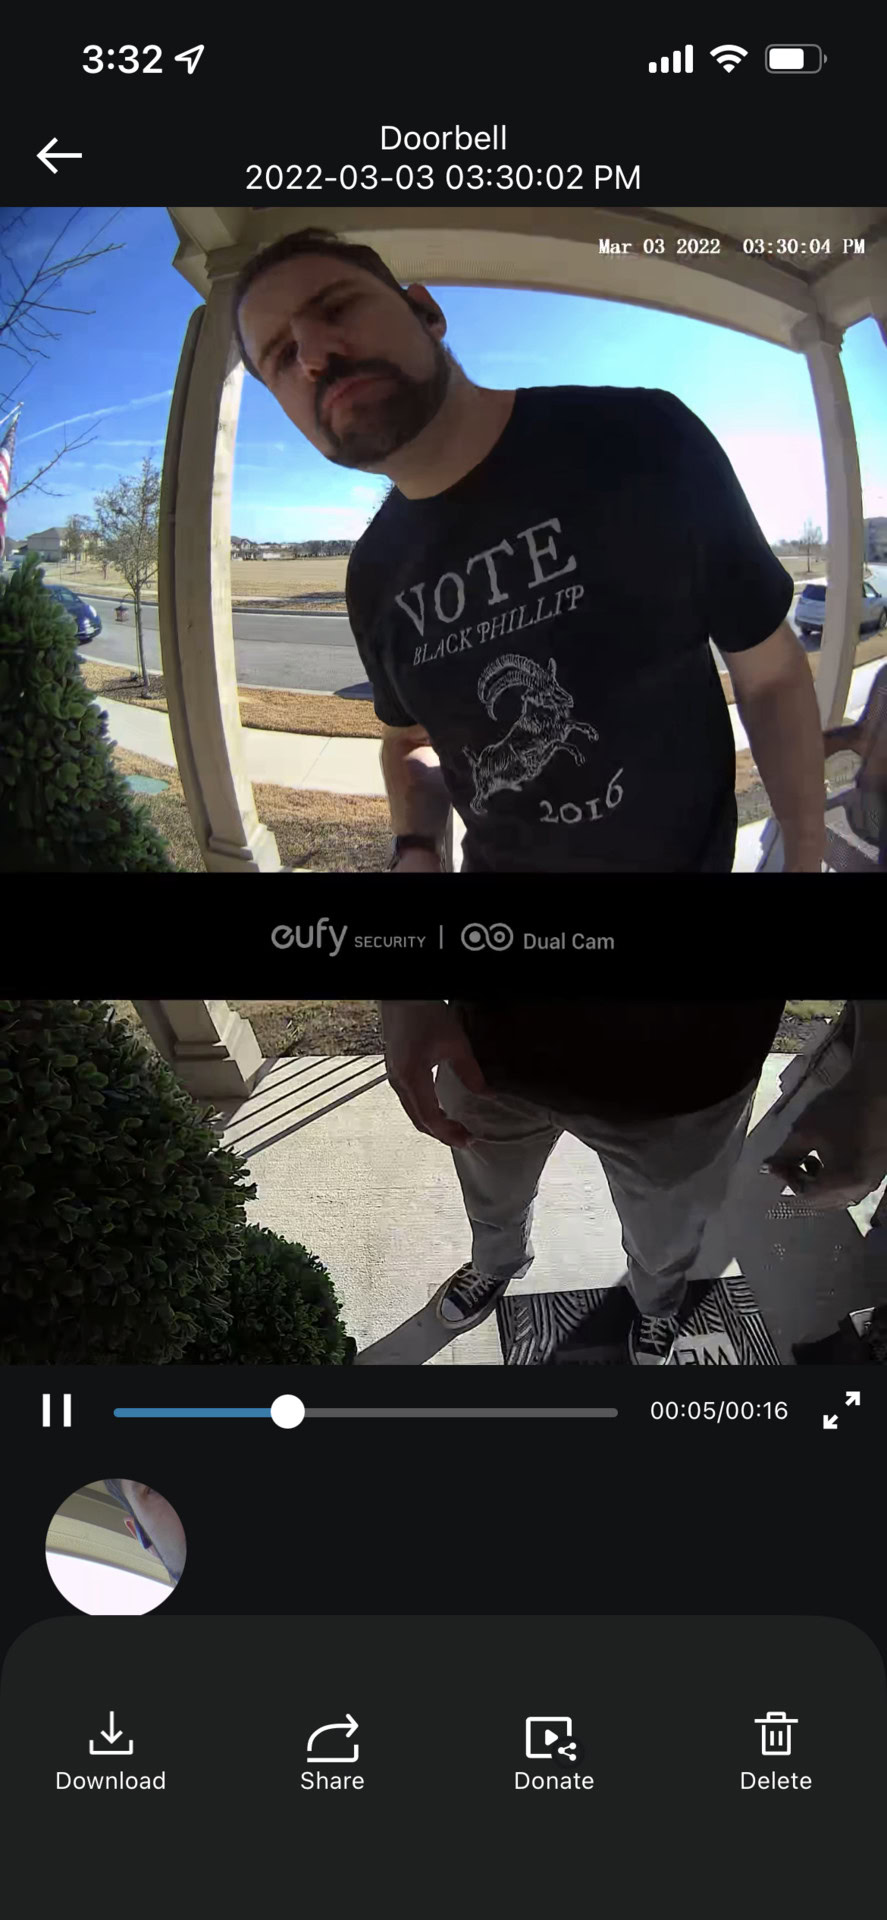 Video playback on the Eufy Video Doorbell Dual